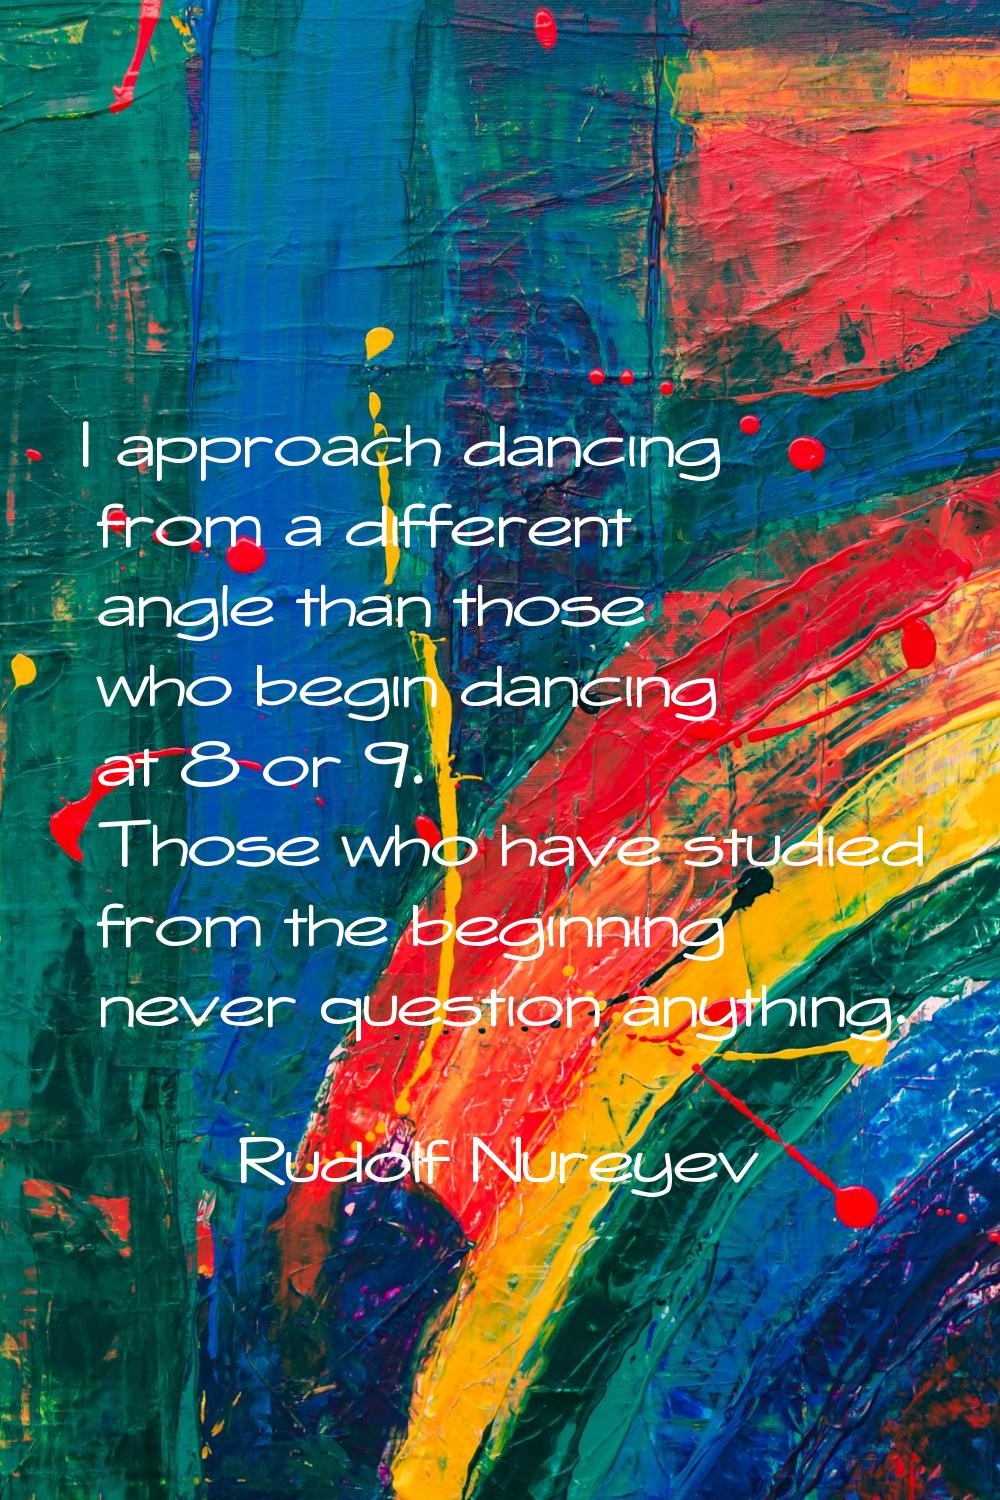 I approach dancing from a different angle than those who begin dancing at 8 or 9. Those who have st